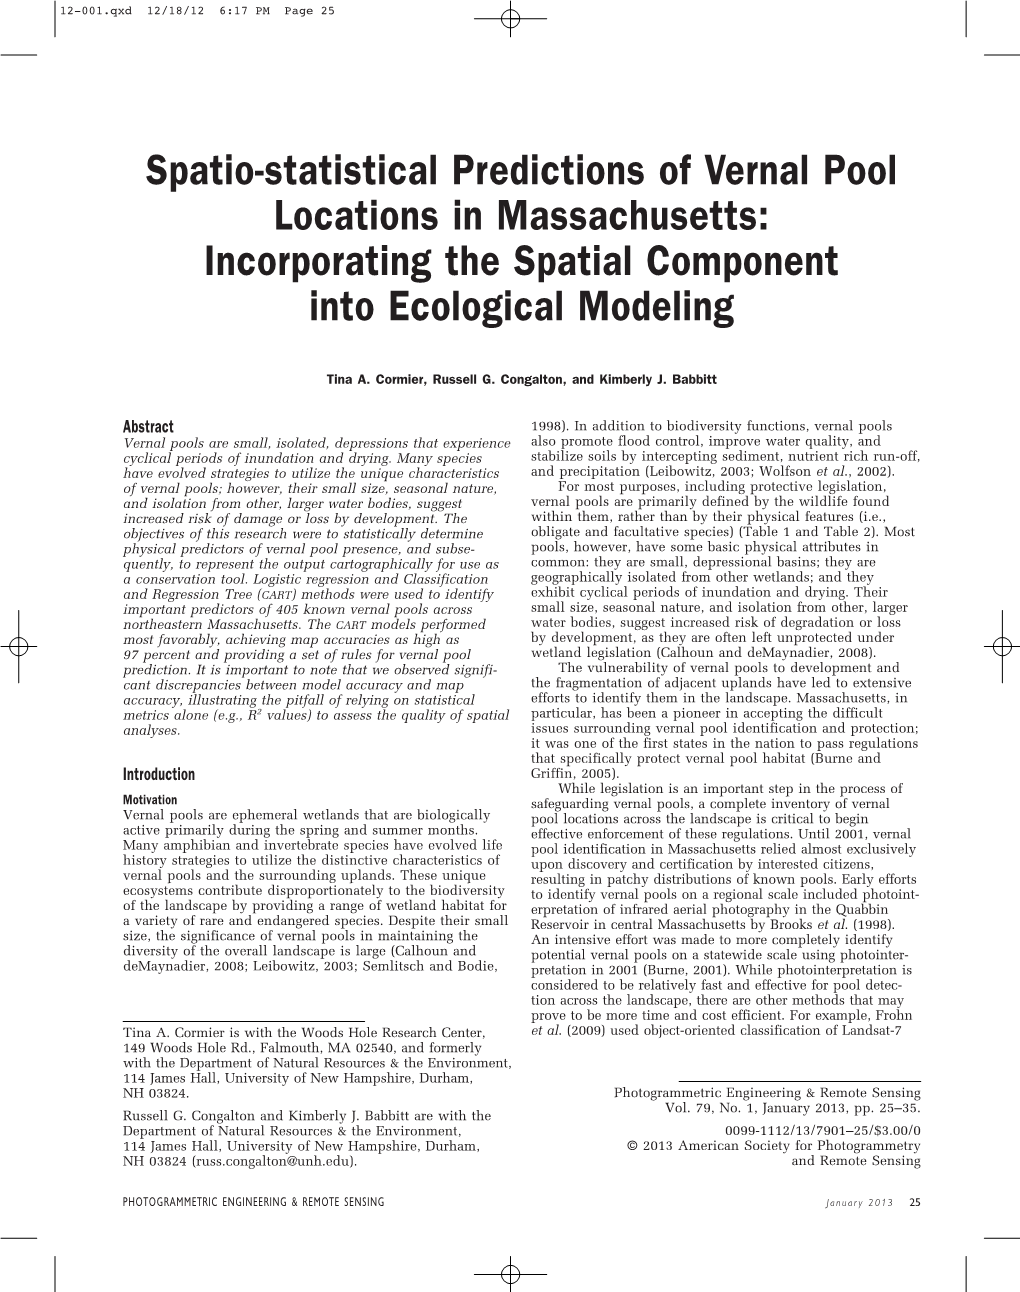 Spatio-Statistical Predictions of Vernal Pool Locations in Massachusetts: Incorporating the Spatial Component Into Ecological Modeling